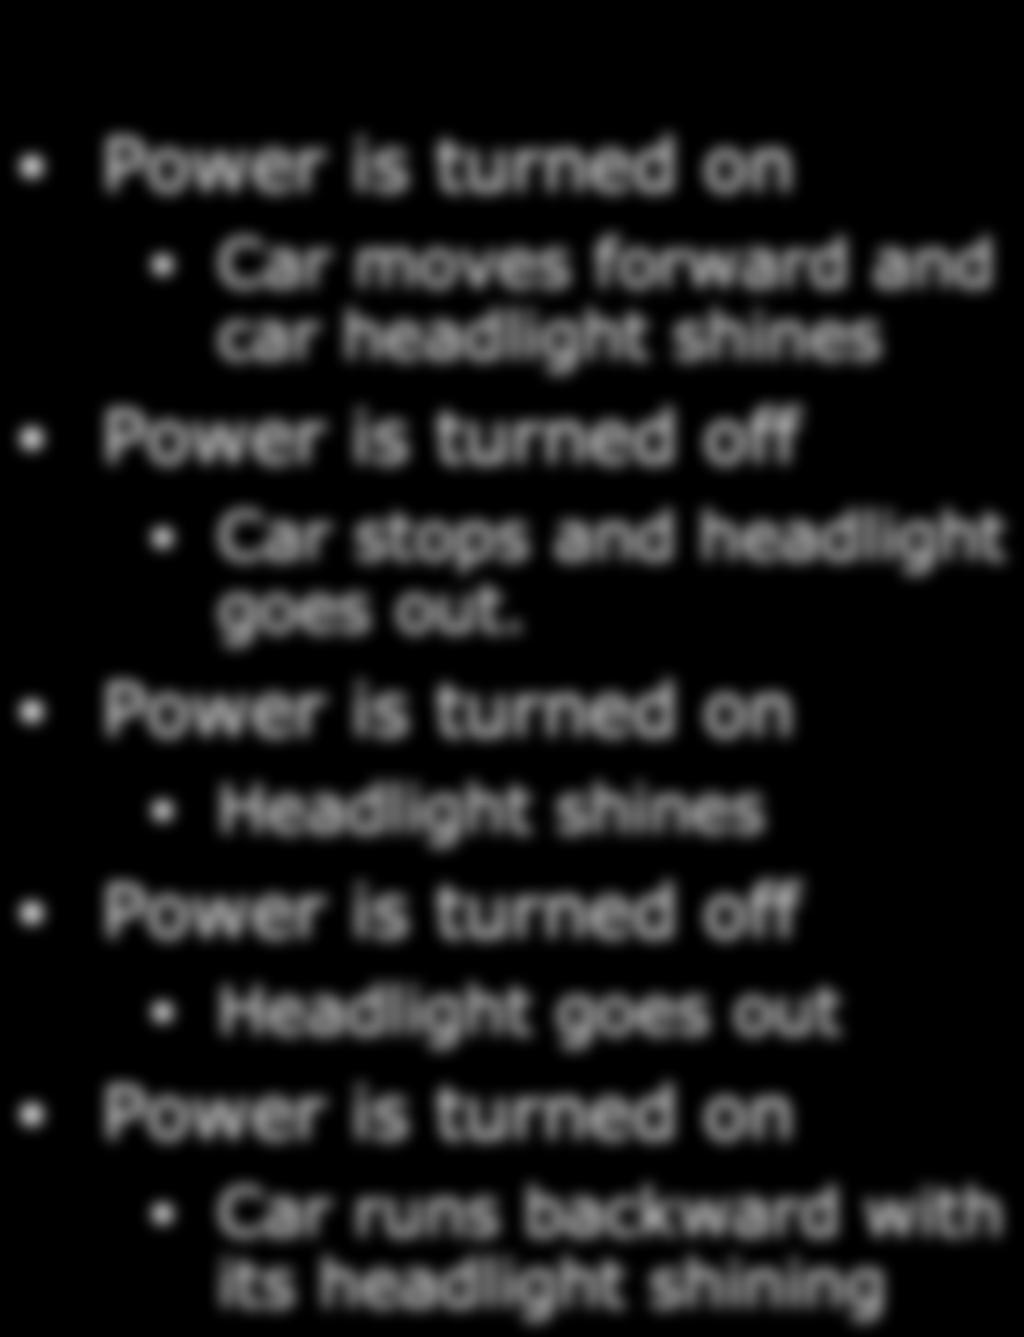 Problem Statement: Direction Control for a Toy Car Power is turned on Car moves forward and car headlight shines Power is